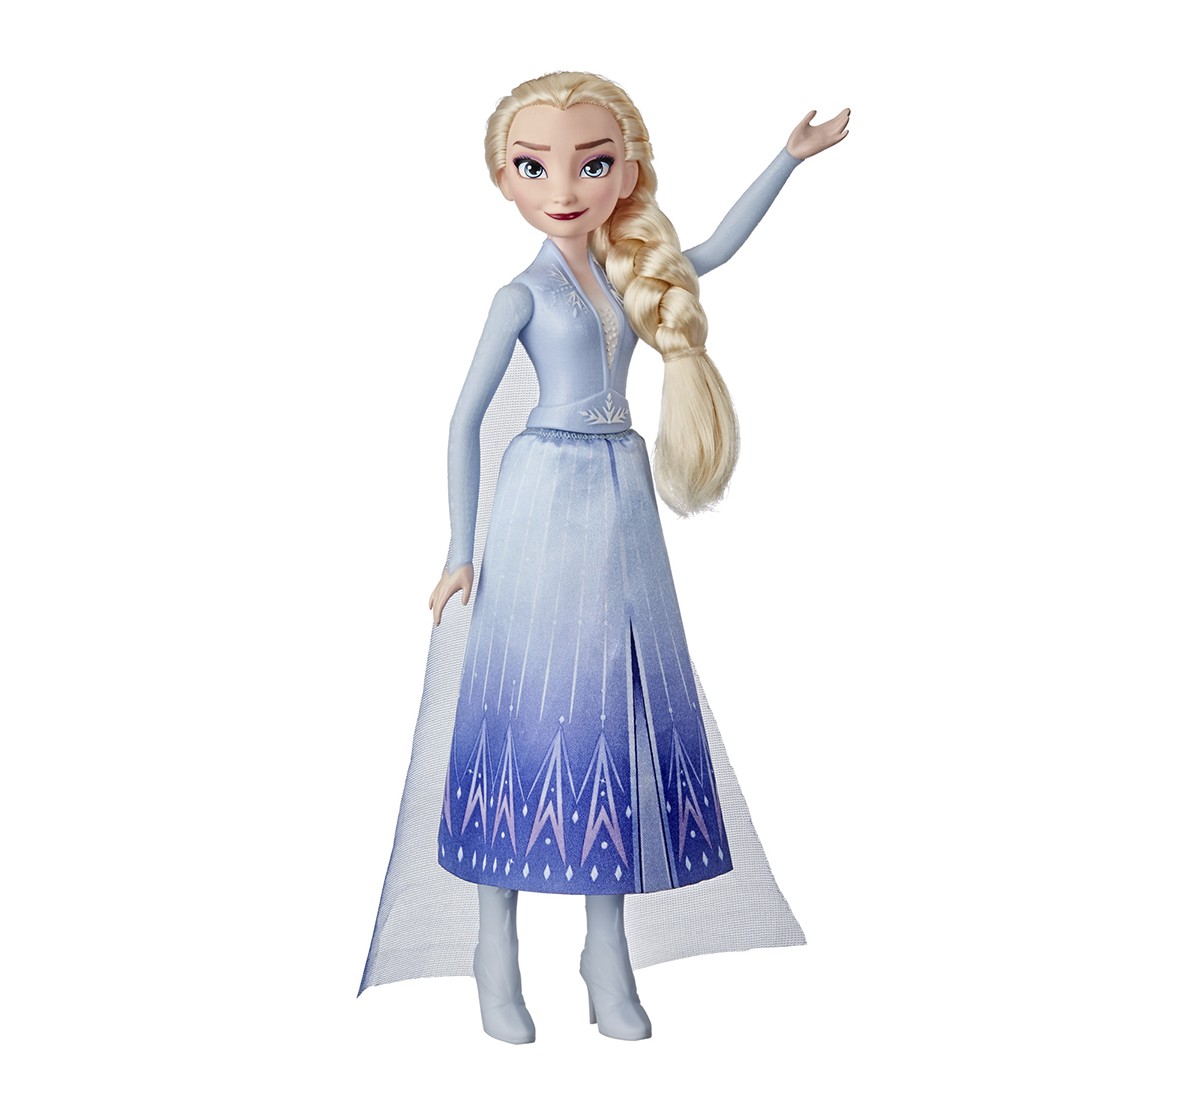 Disney's Frozen 2 Elsa Fashion Doll With Long Blonde Hair, Skirt, and Shoes, Elsa Toy Inspired by Disney's Frozen 2  Dolls & Accessories for age 3Y+ 